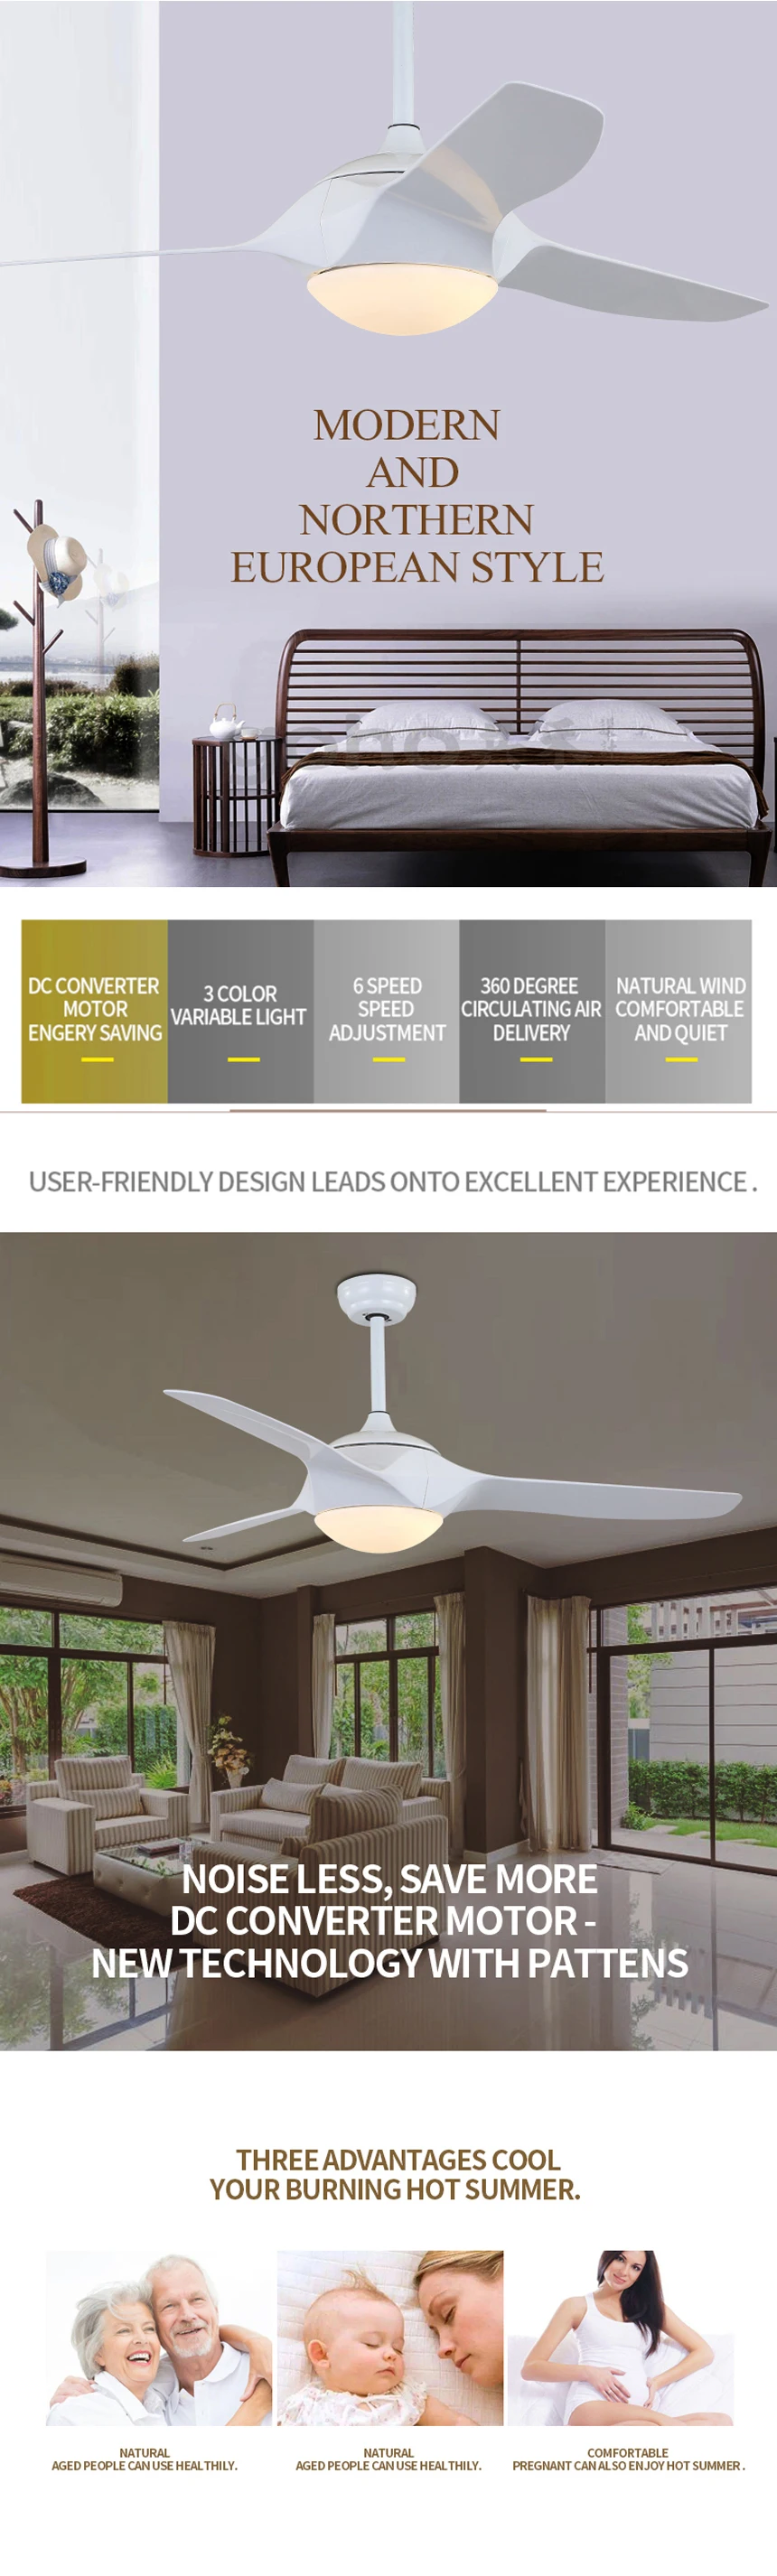 Cheap wholesale simple design indoor decorative ceiling fan with light